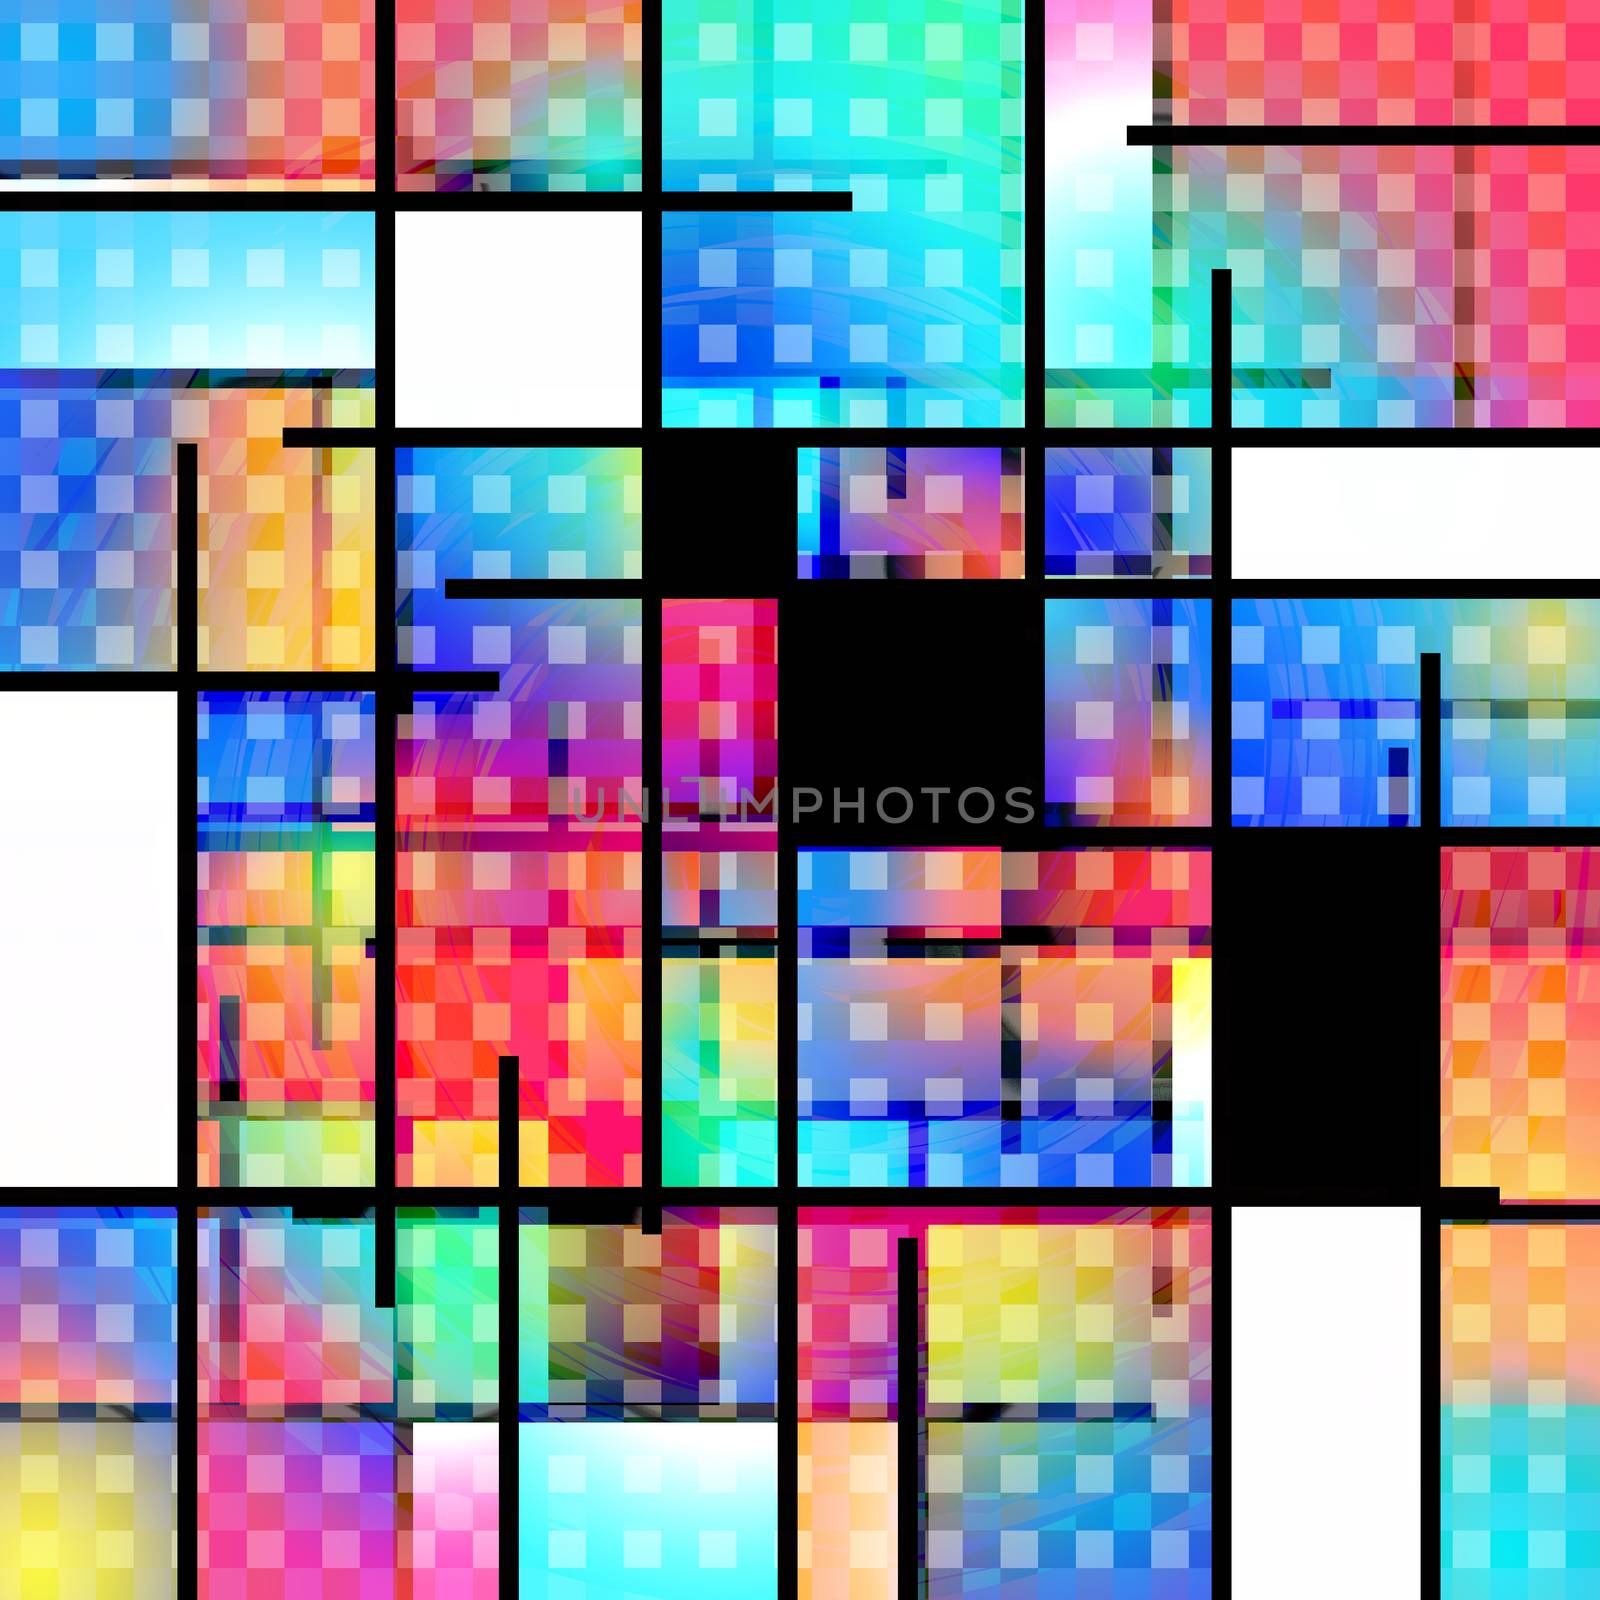 Colorful geometric background Mondrian inspired